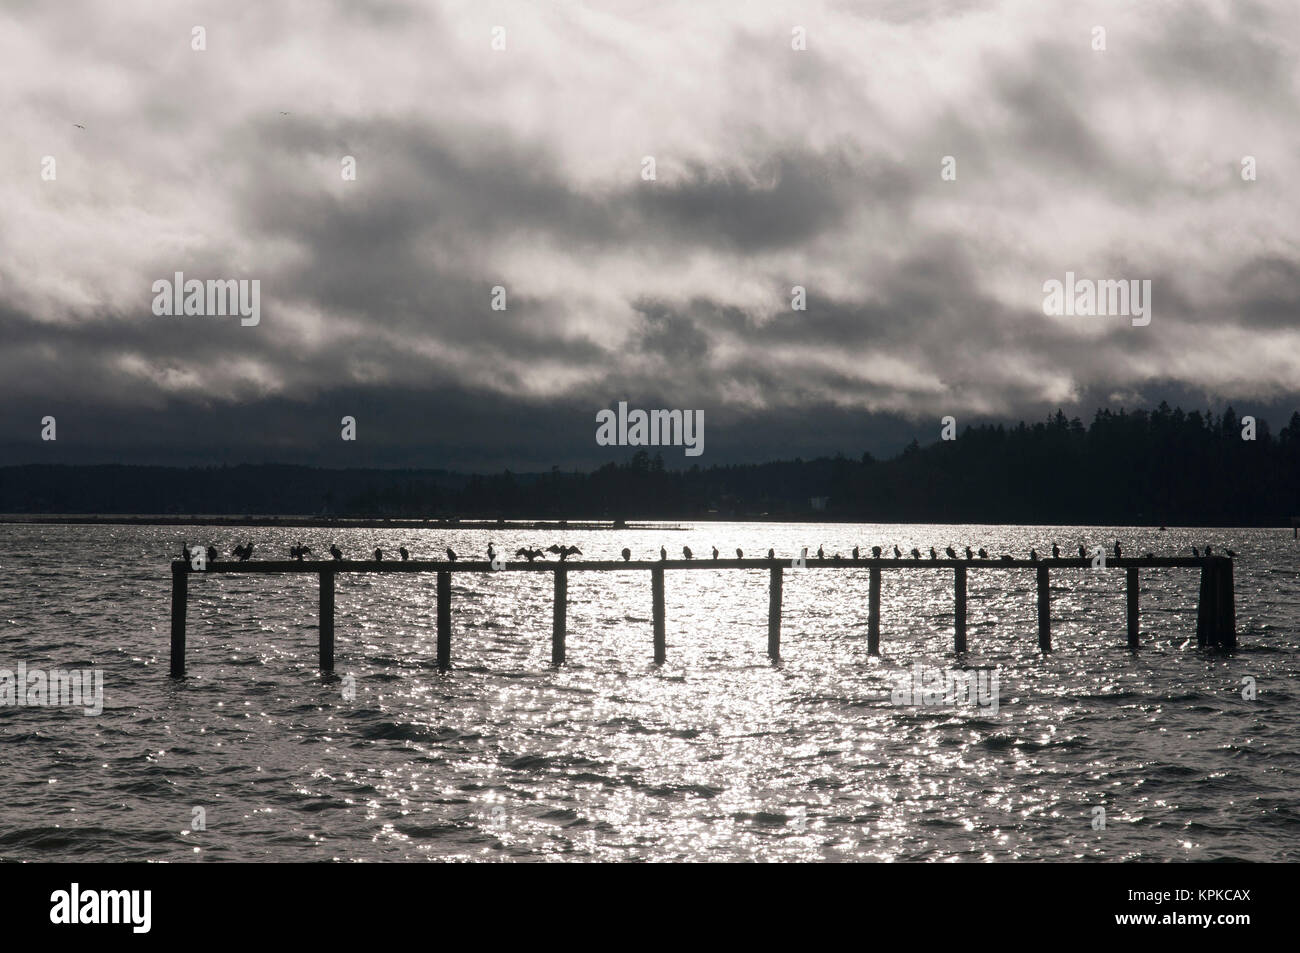 US, WA, Bainbridge Island, Rich Passage. Flock of cormorants (Phalacrocoracidae) perch on old pier remnant to dry wings. Weather approaching from south west makes dramatic backdrop. Stock Photo